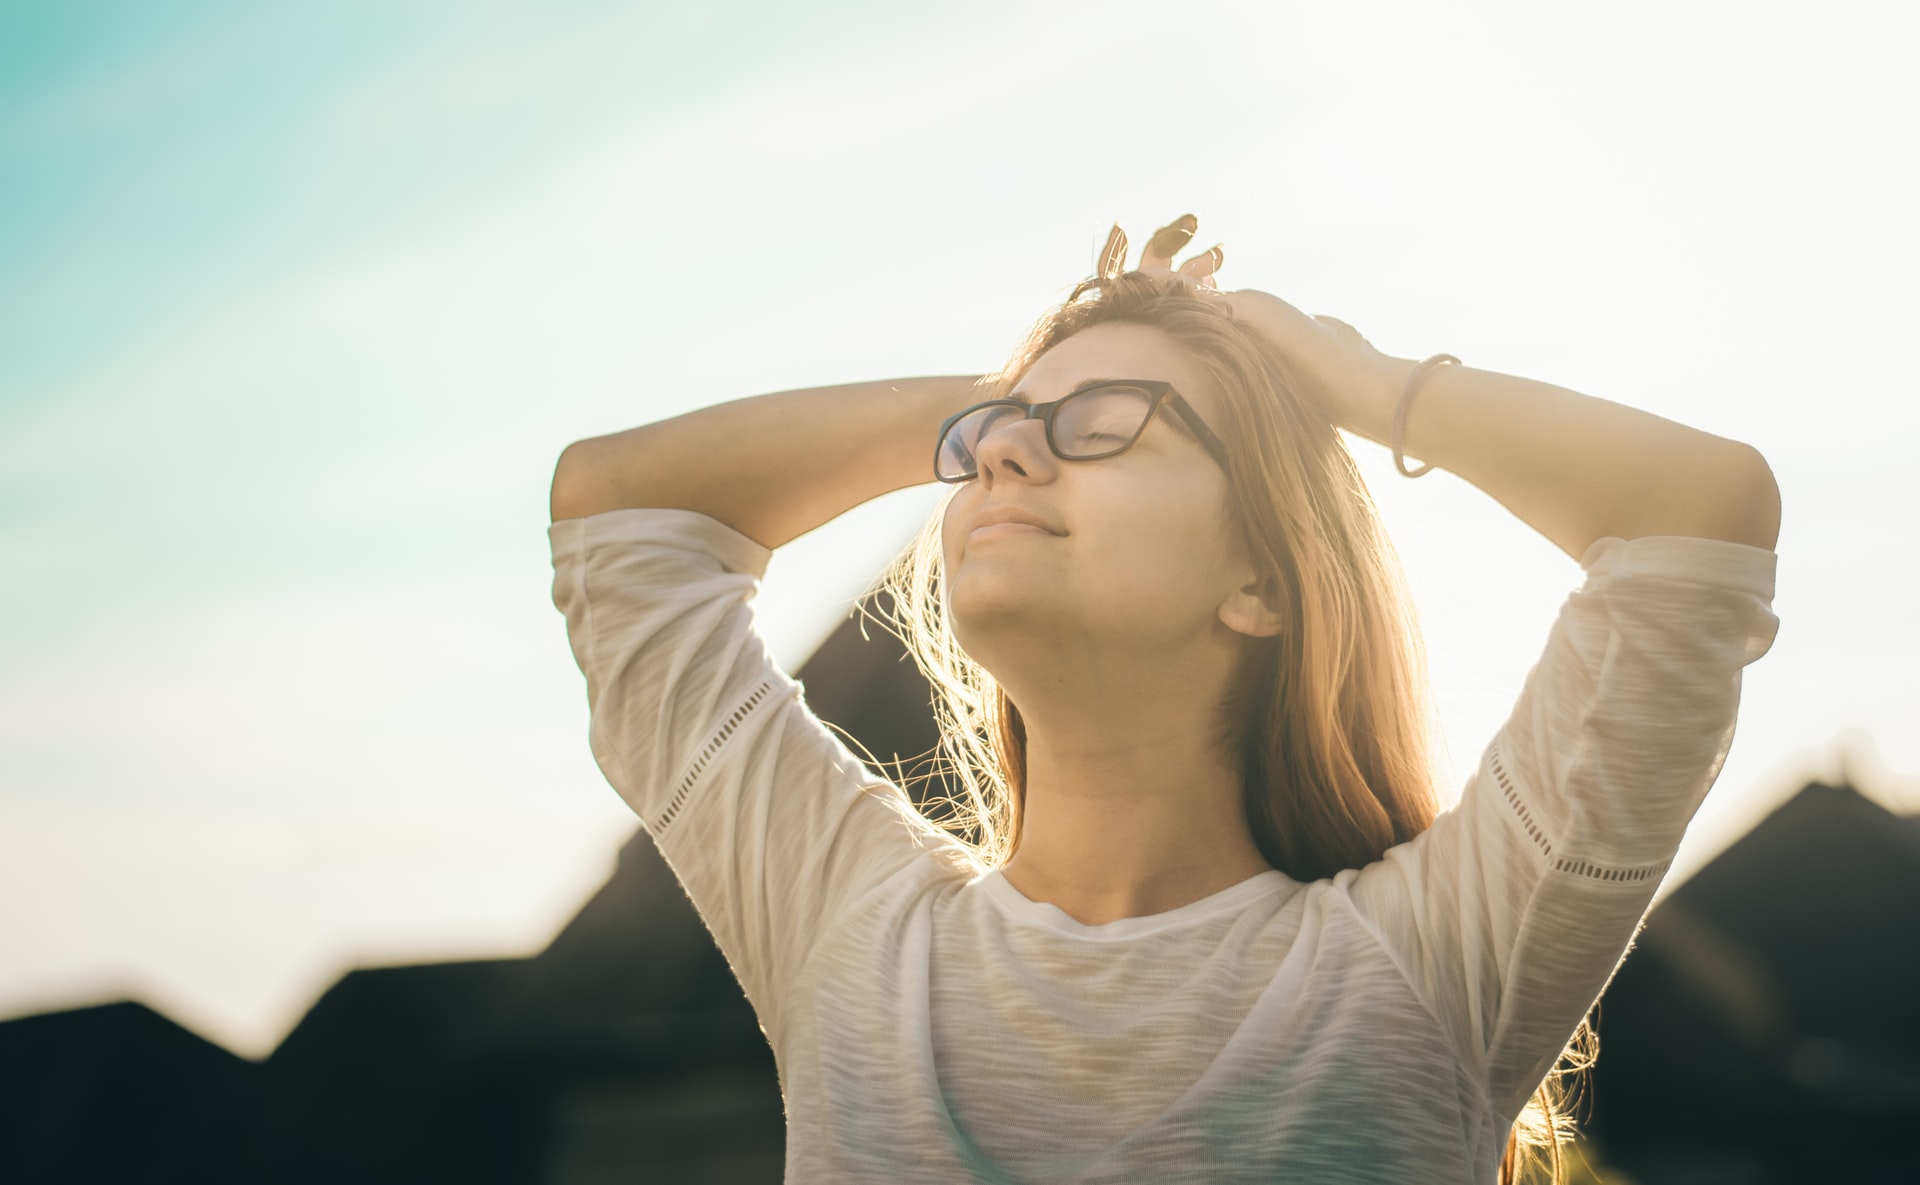 Stretch your arms in the sun knowing there are ways to feel less overwhelmed.